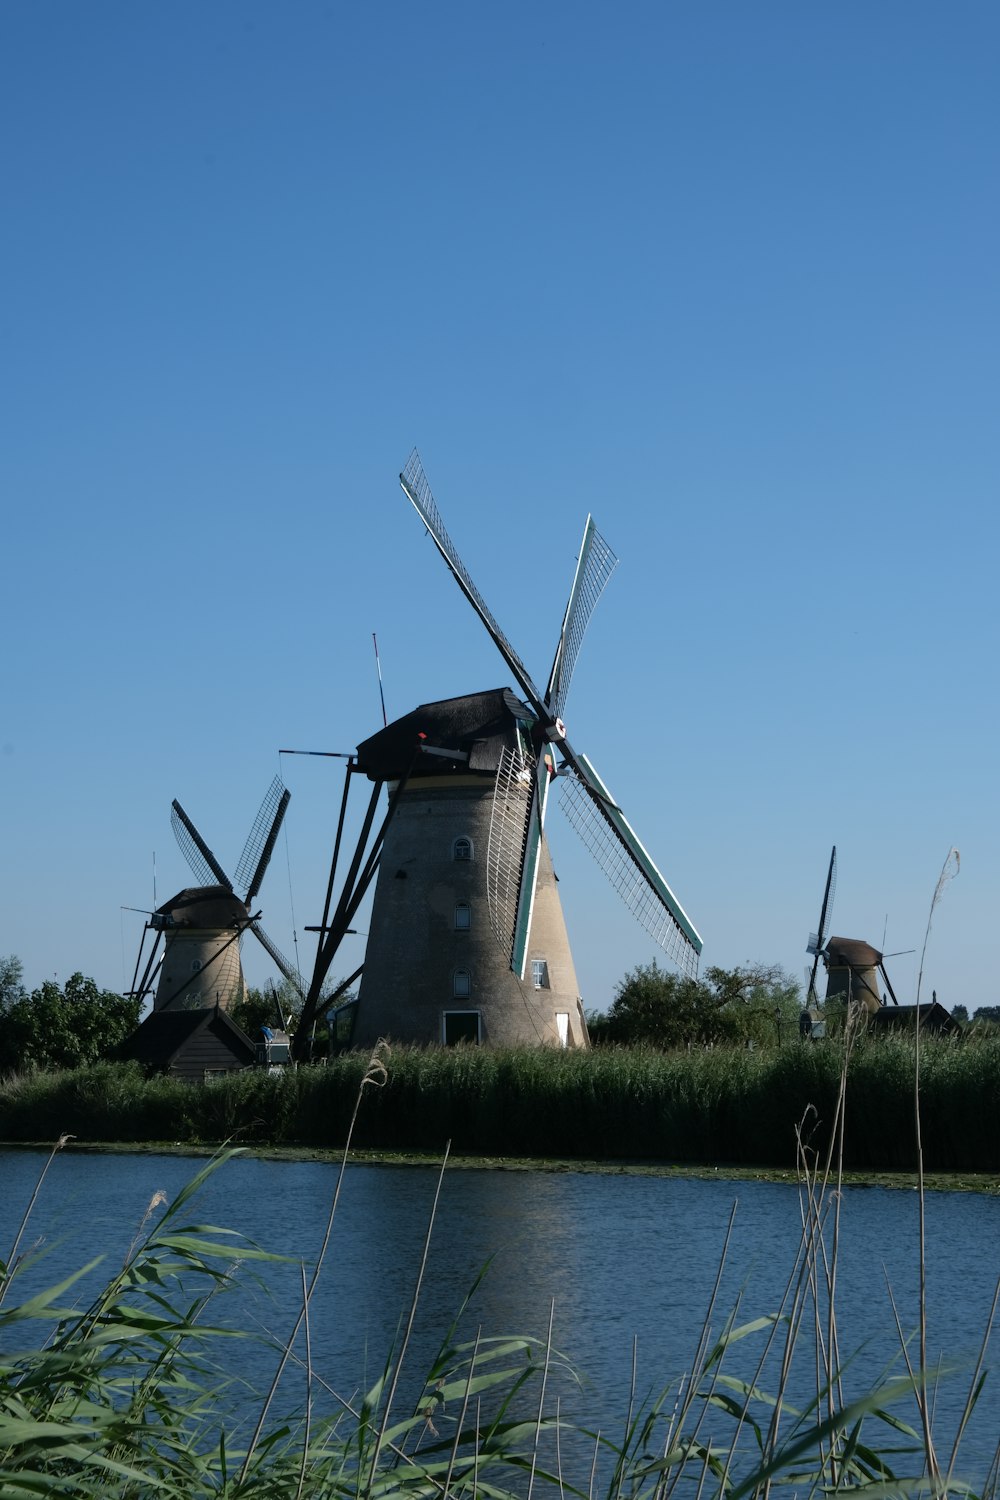 a group of windmills by a body of water